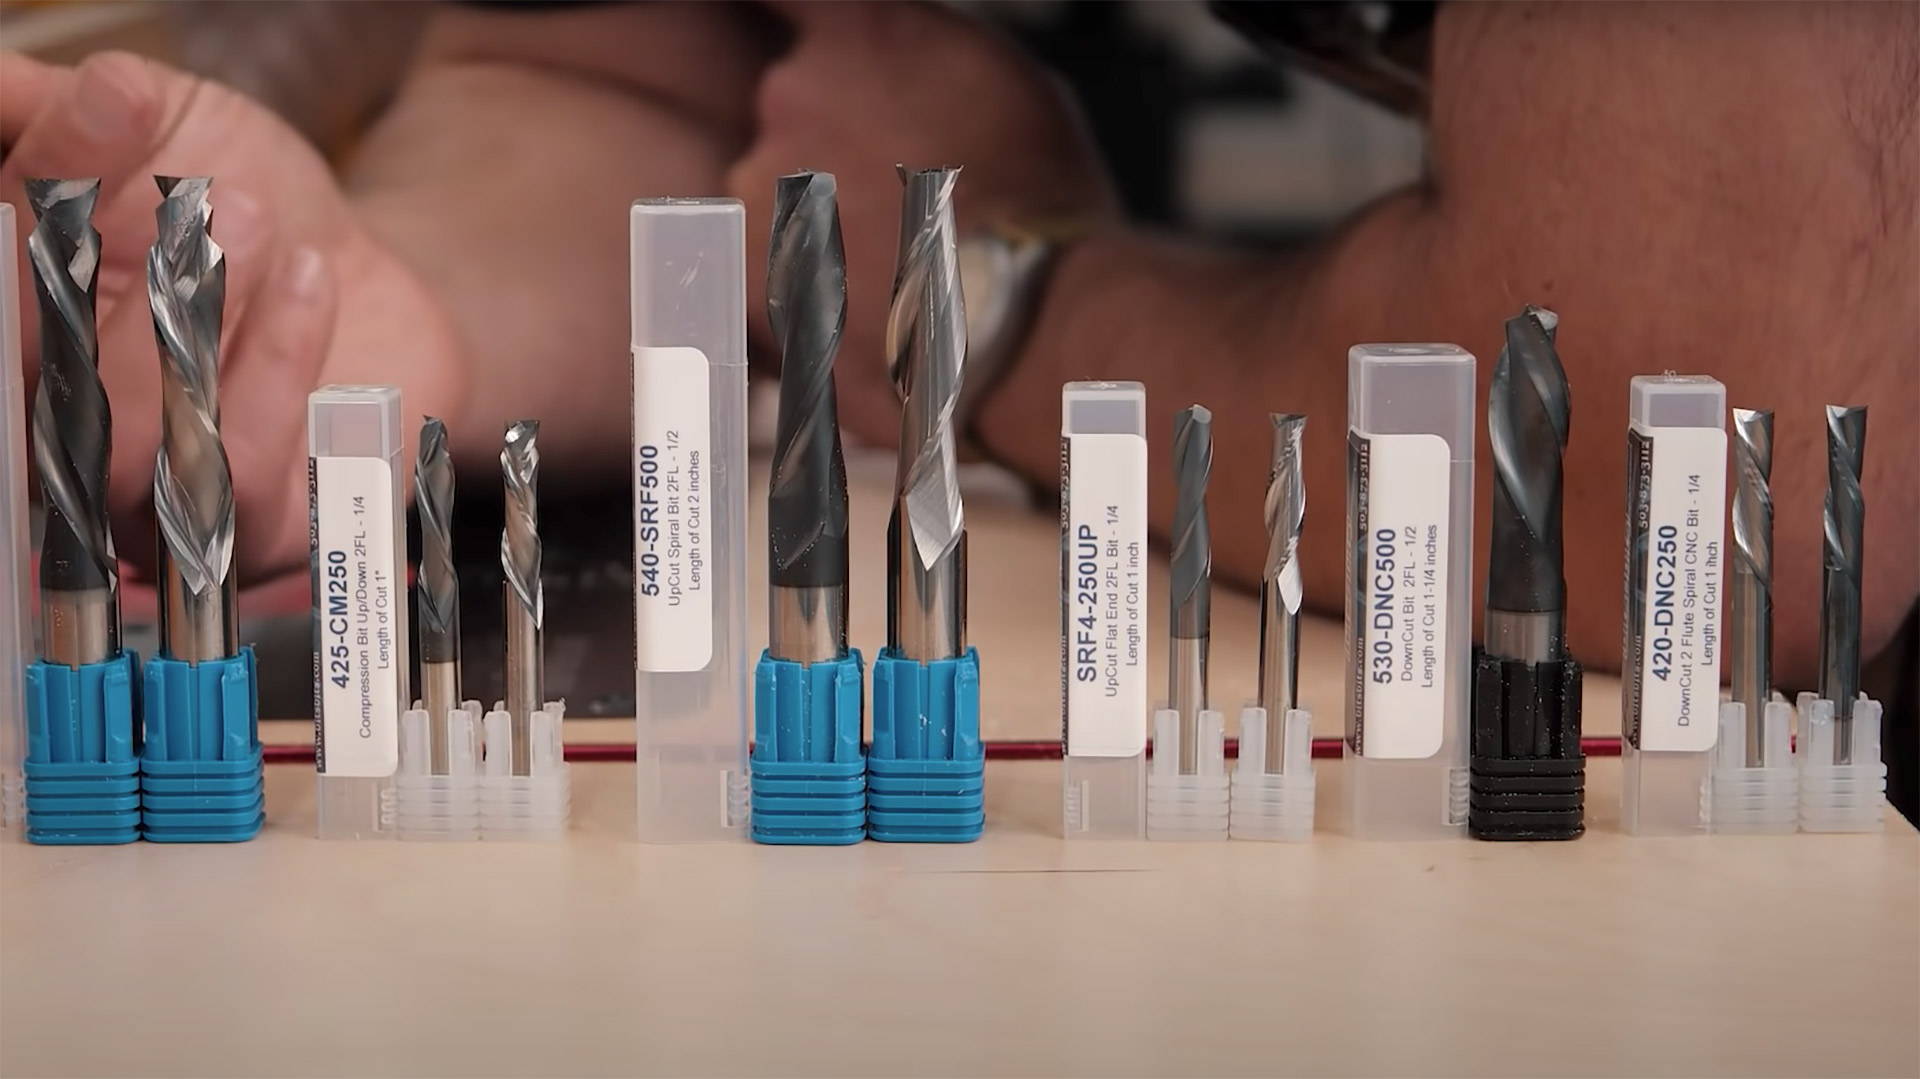 Spiral Router Bits: Styles, Uses, and Why They’re the Best